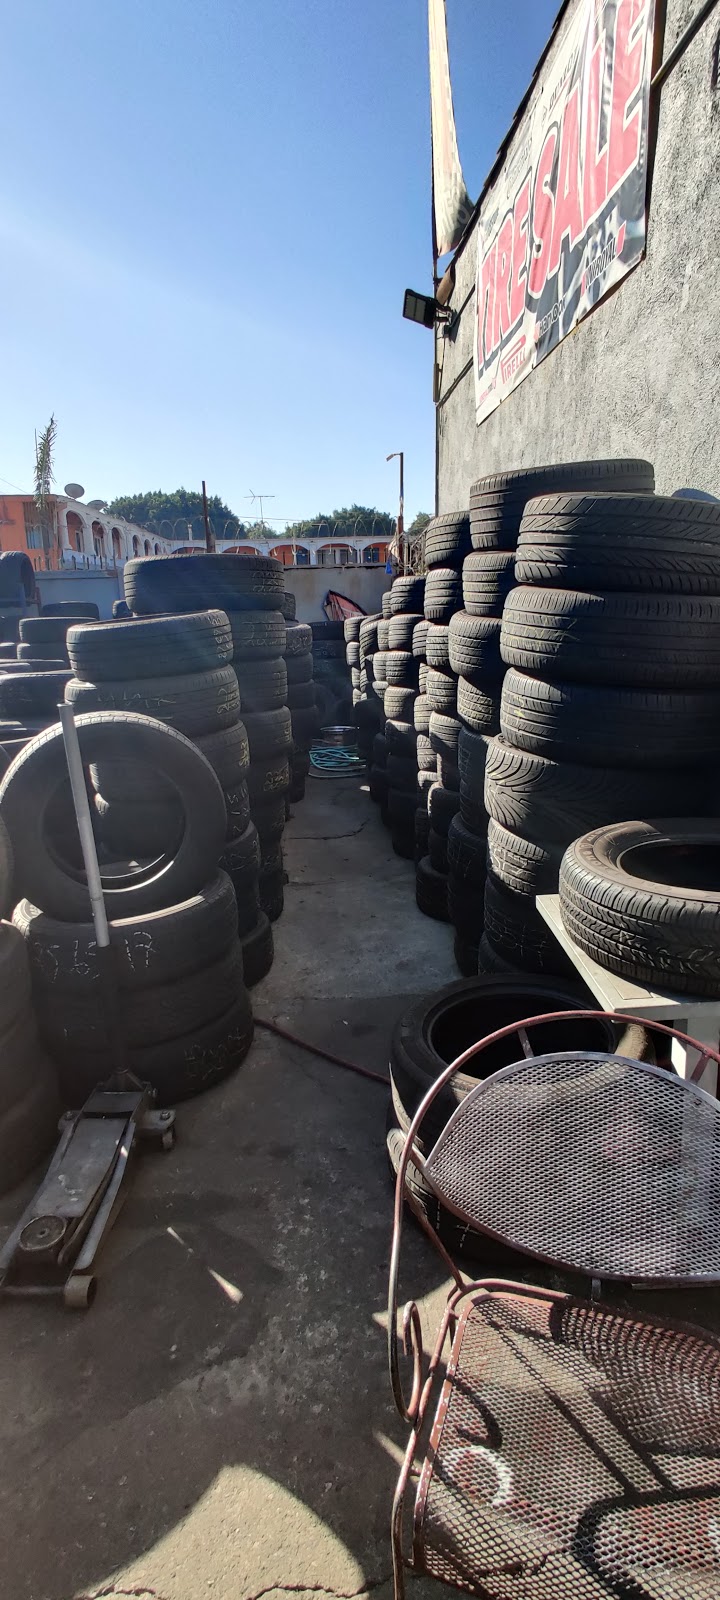 M and M tire shop | 8775 S Central Ave, Los Angeles, CA 90002 | Phone: (323) 537-4958